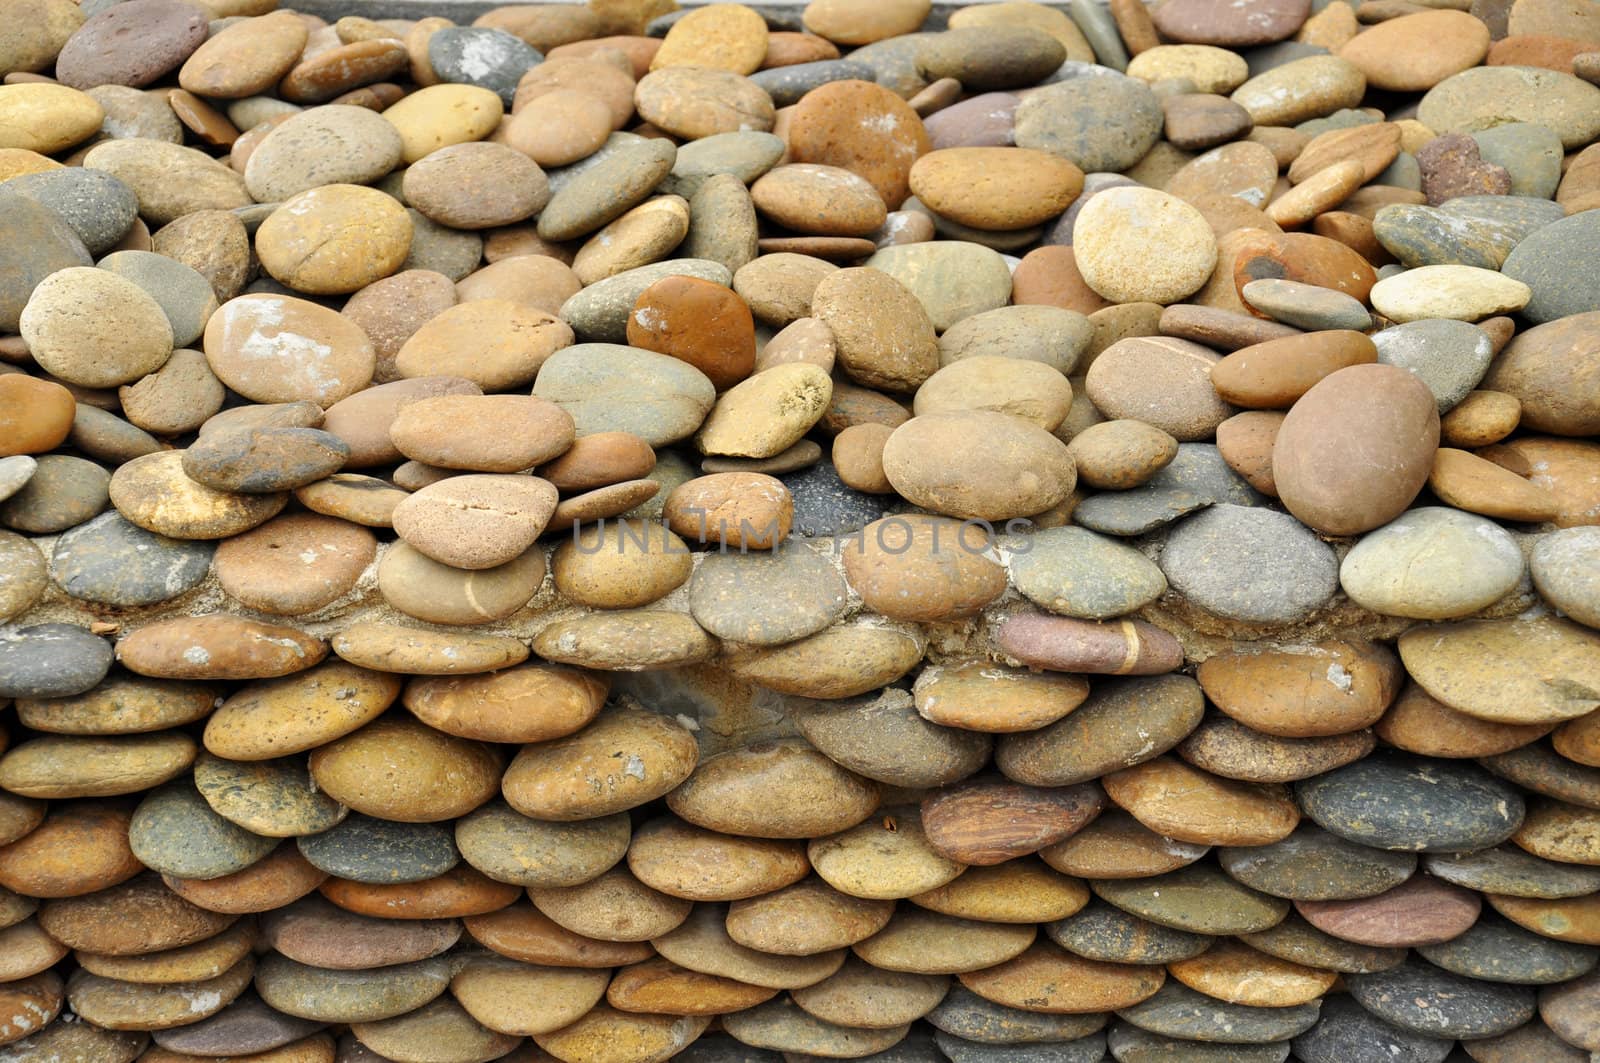 Natural brown stones for background.